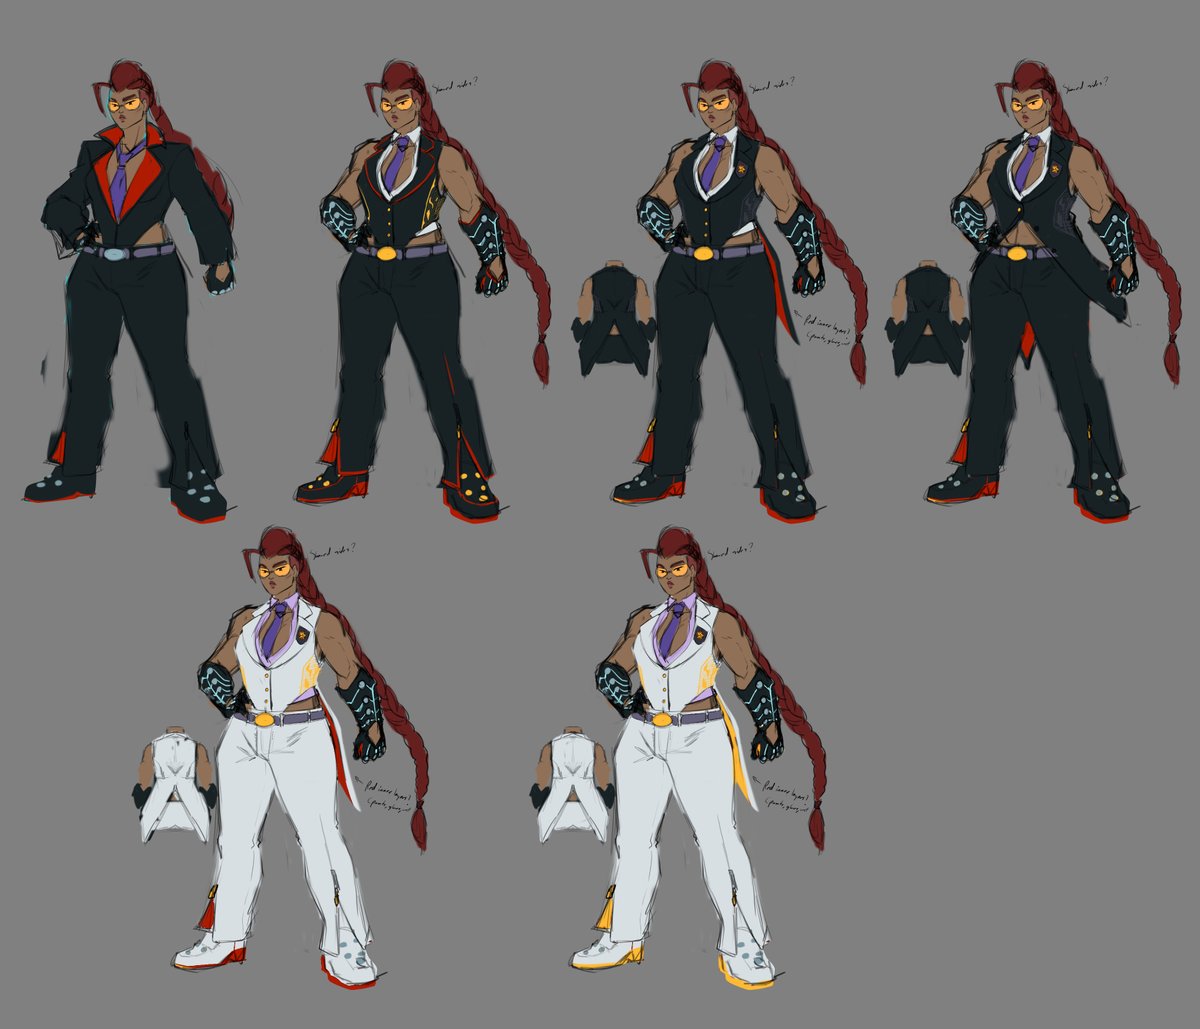 i just realized i never posted this here but i was messing around with a C. Viper design a few months back.

not too much just some brainstormin

#StreetFighter